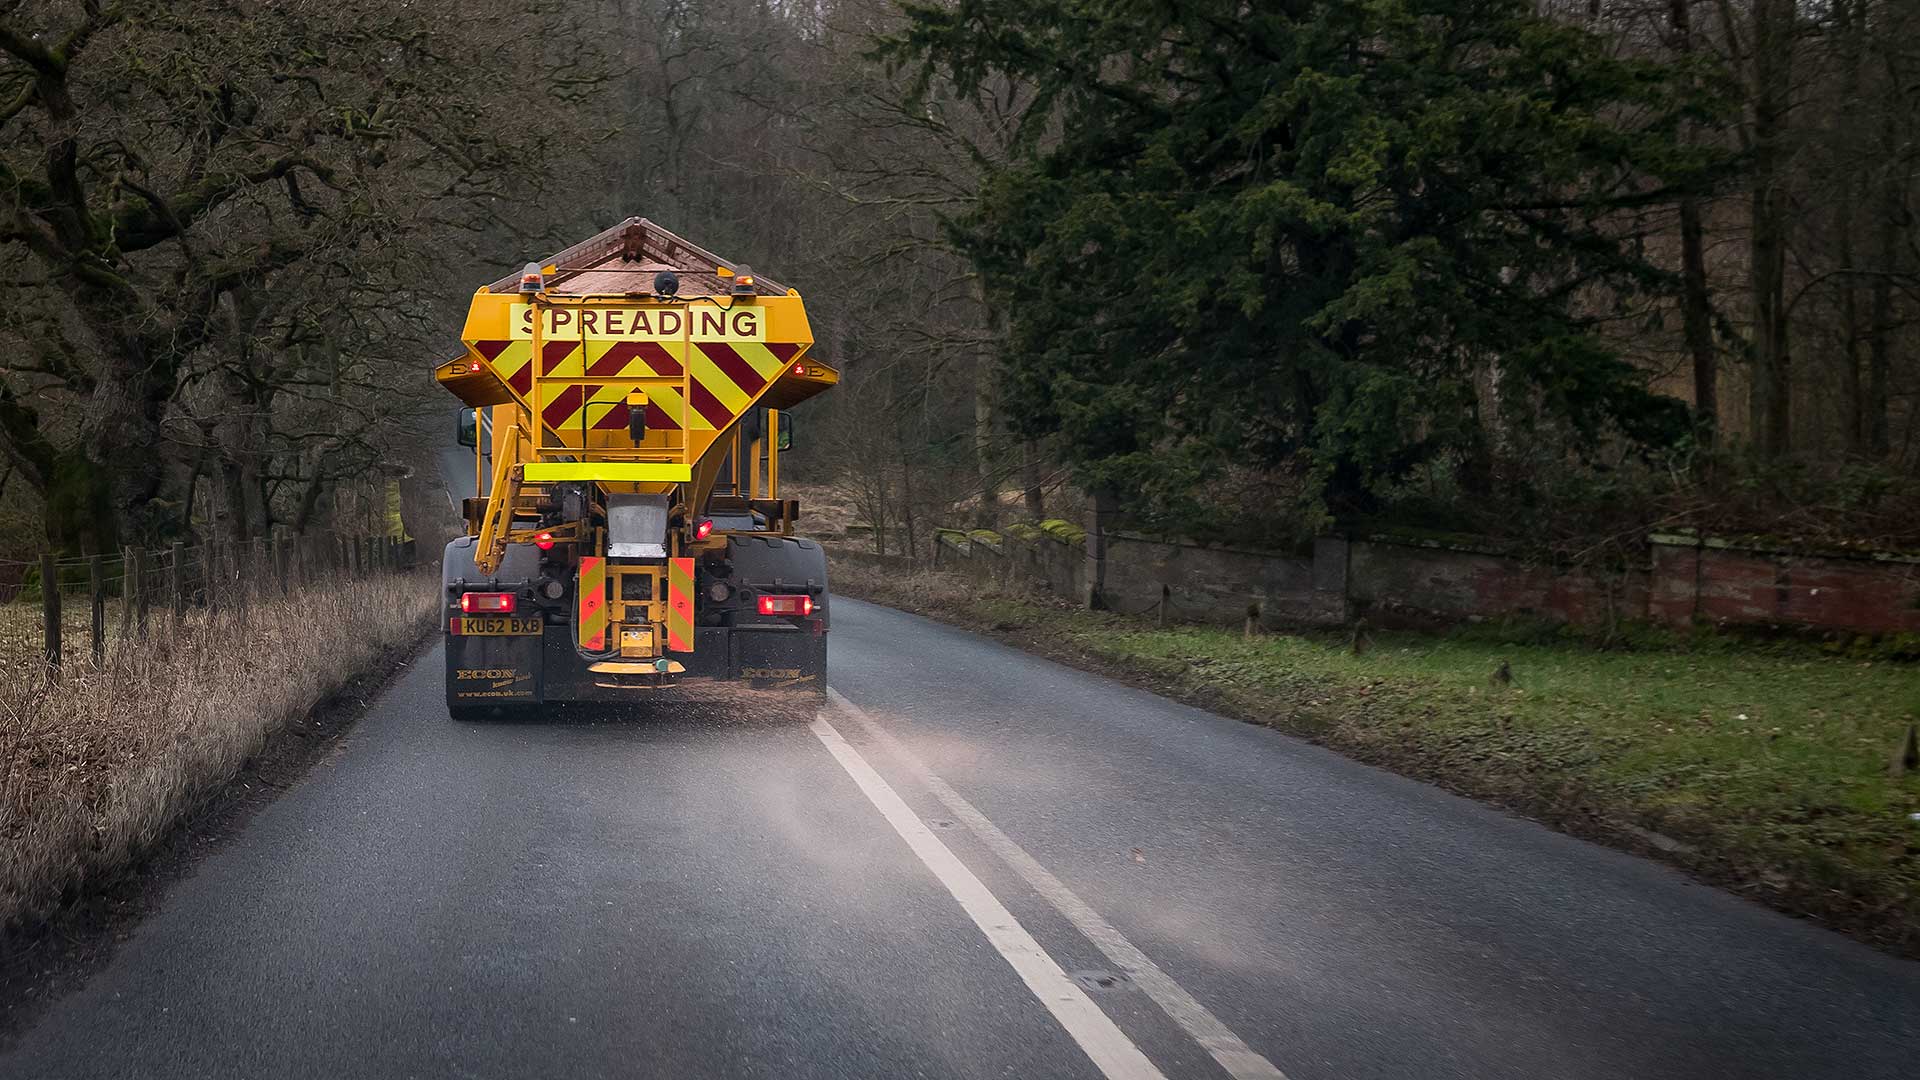 Road gritter spreading salt on a British road